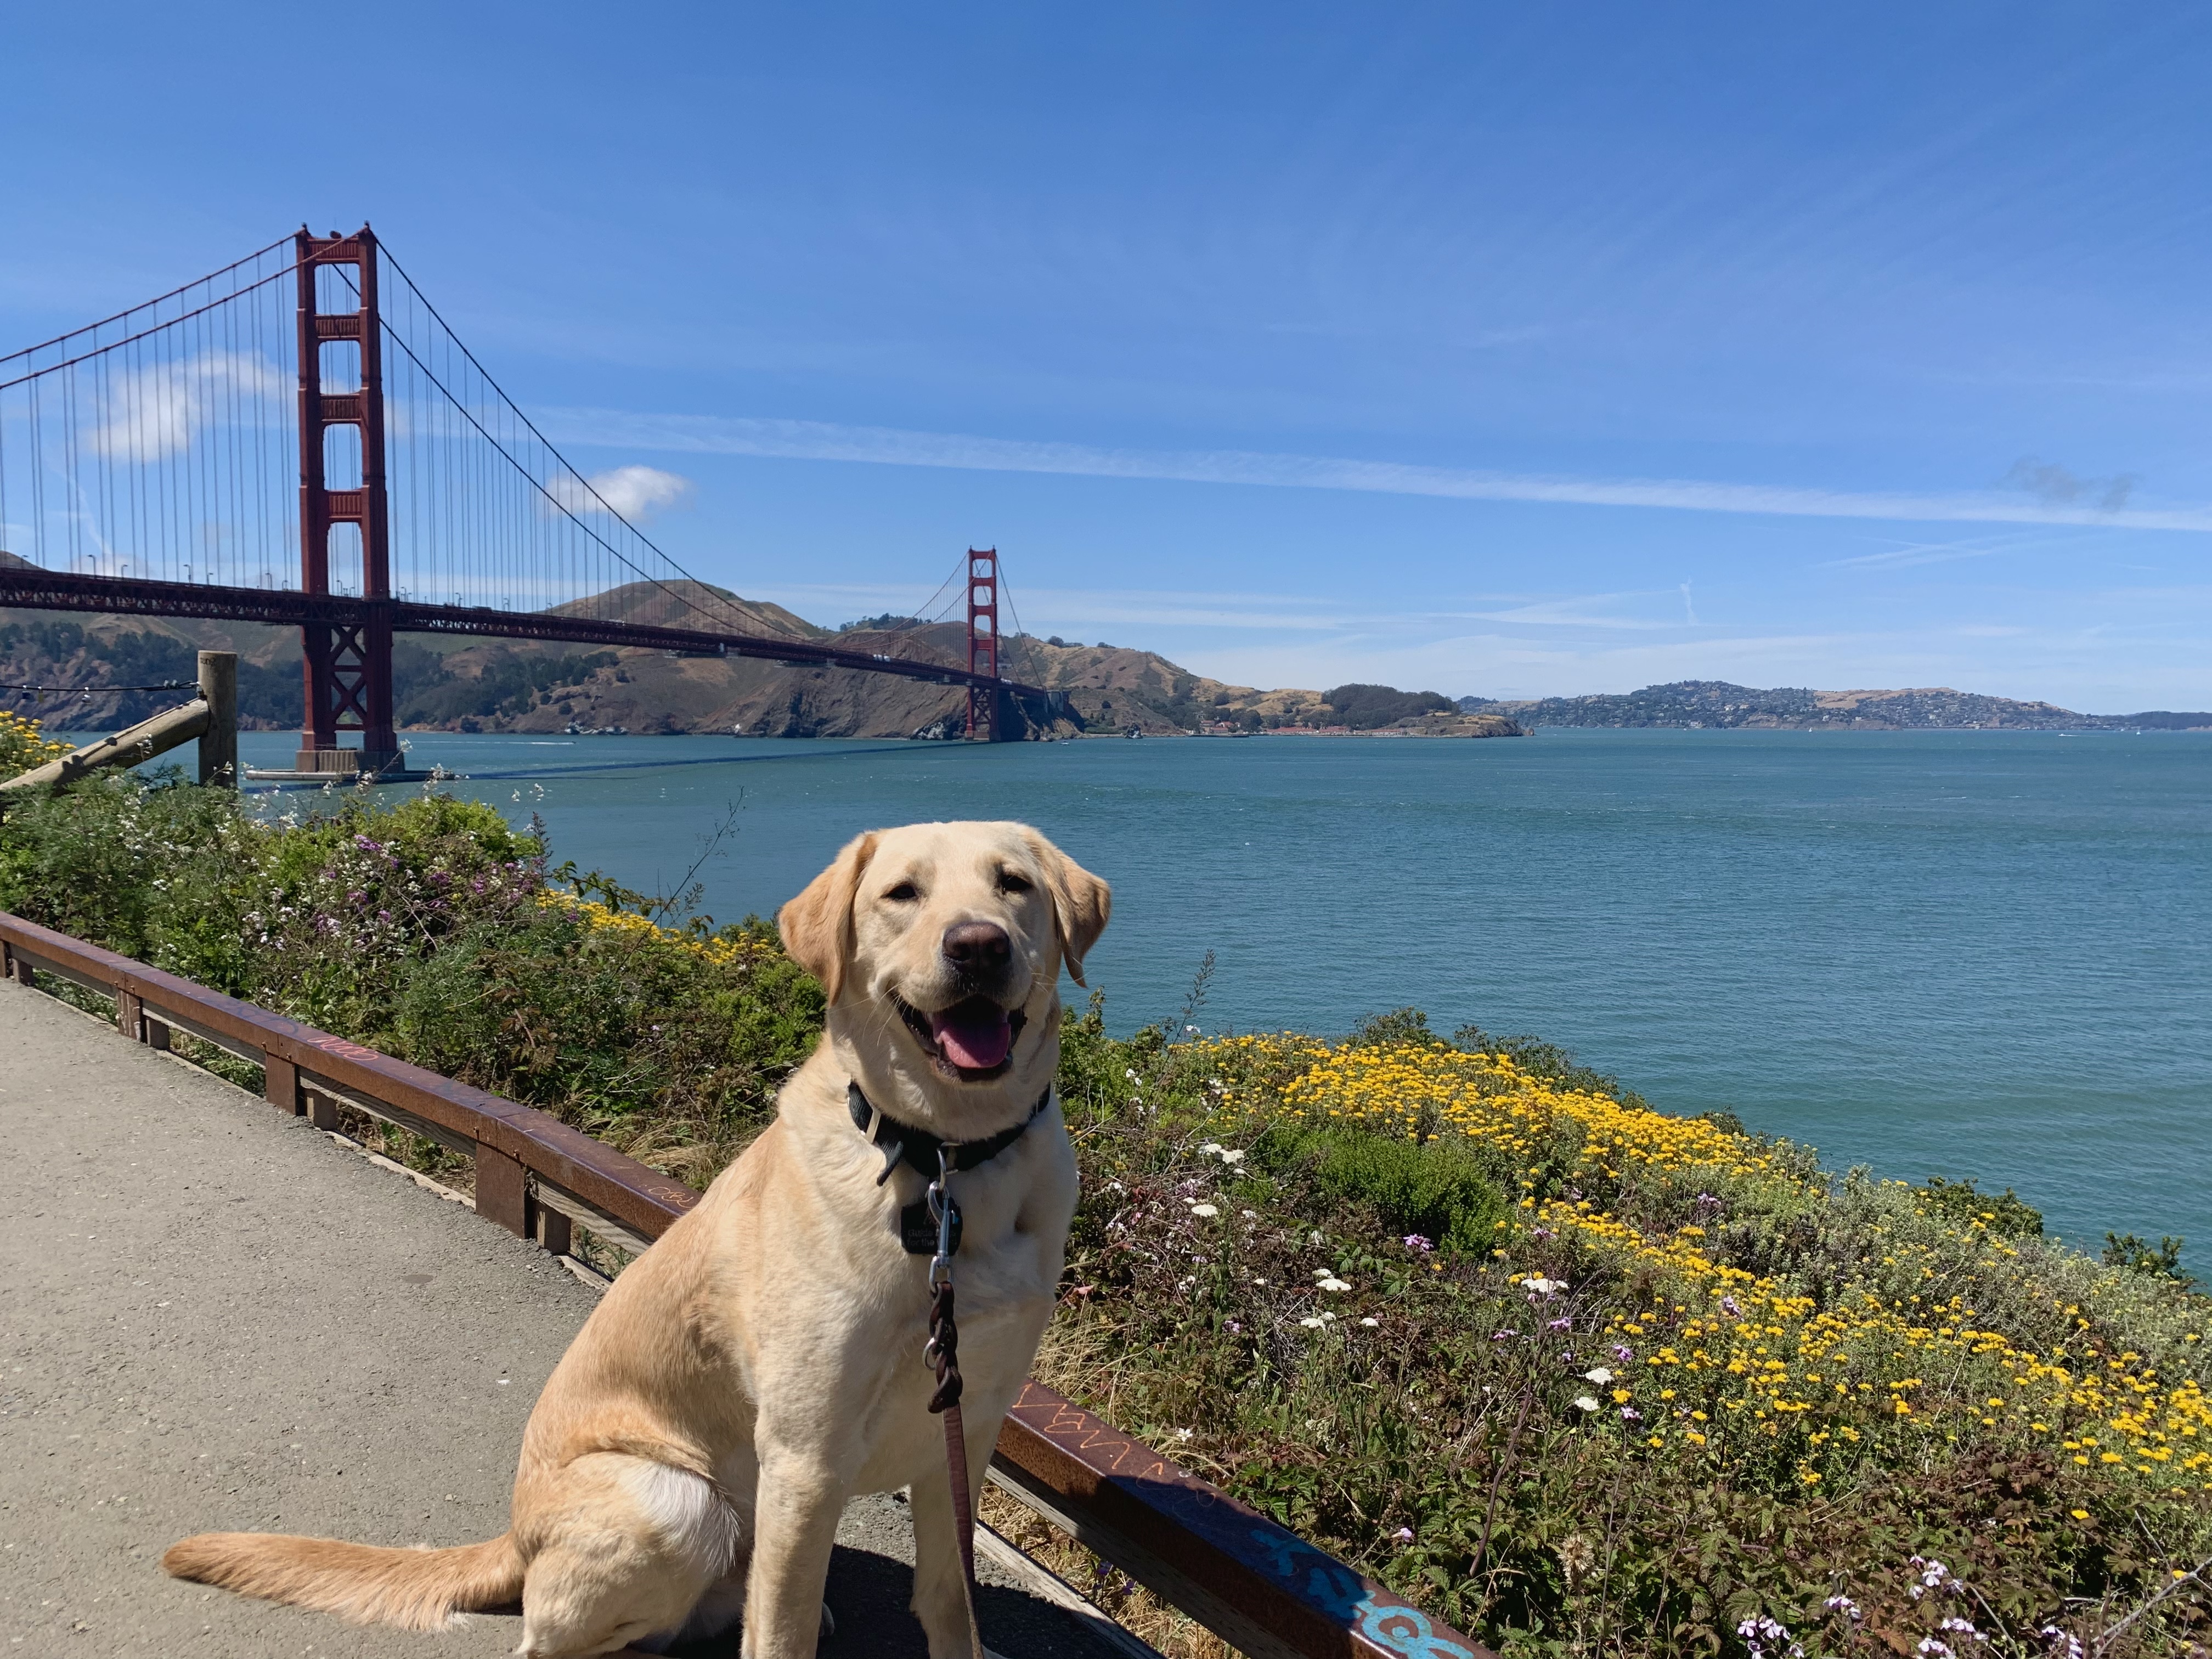 YYellow lab, Laredo, smiles up at the camera and sits next to a strip of green and yellow shrubs. Behind him is the red Golden Gate Bridge over the teal Bay.